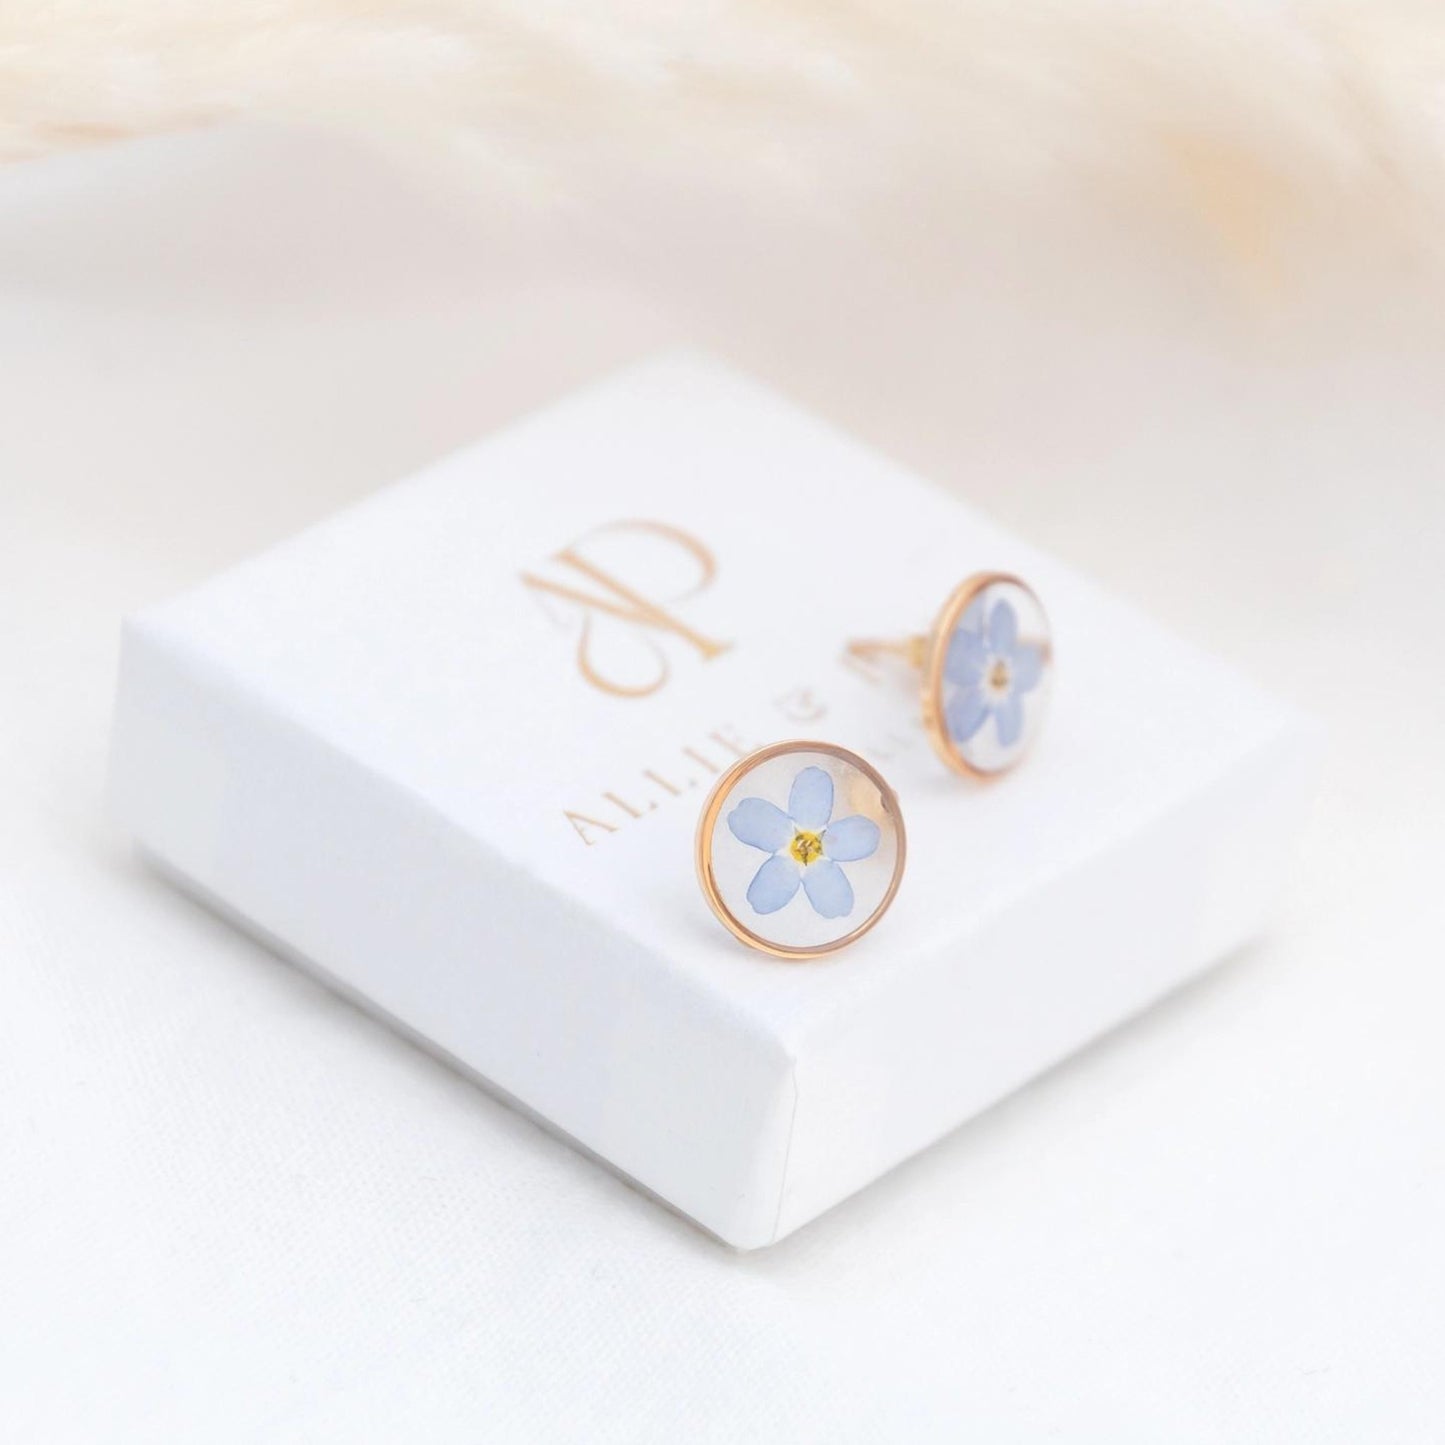 Forget-Me-Not Flower Studs - Gold Plated - The Little Jewellery Company